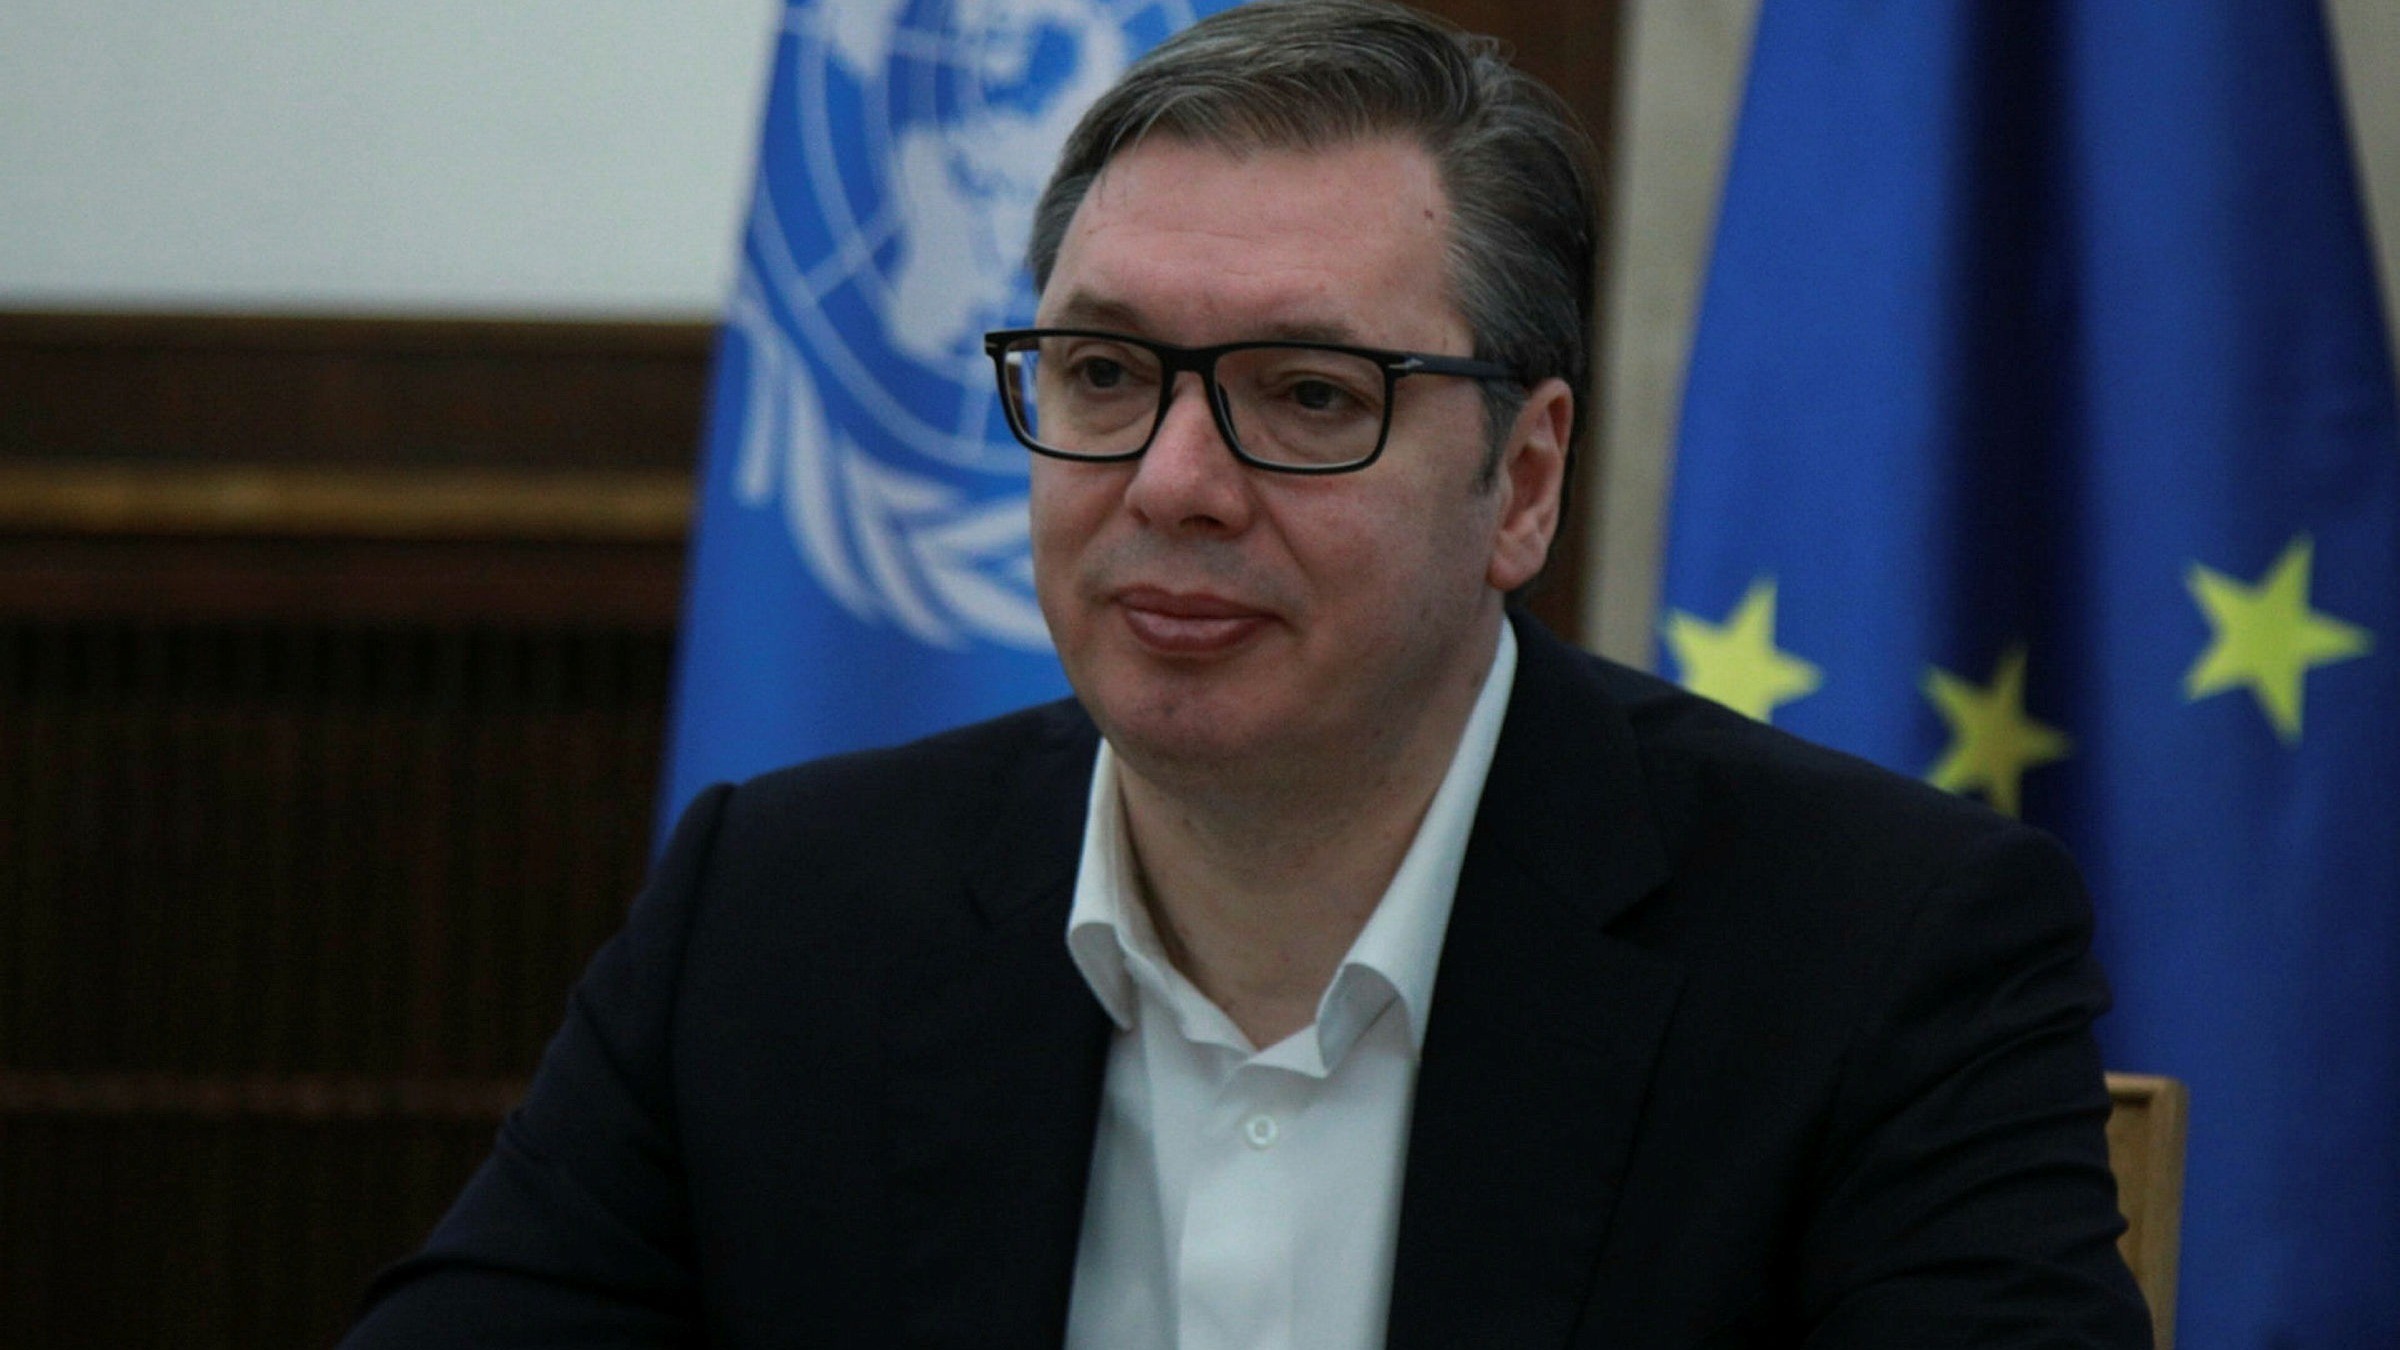 Vucic: I Don’t Know How To Solve The Problem, But I Will Not Recognize Kosovo